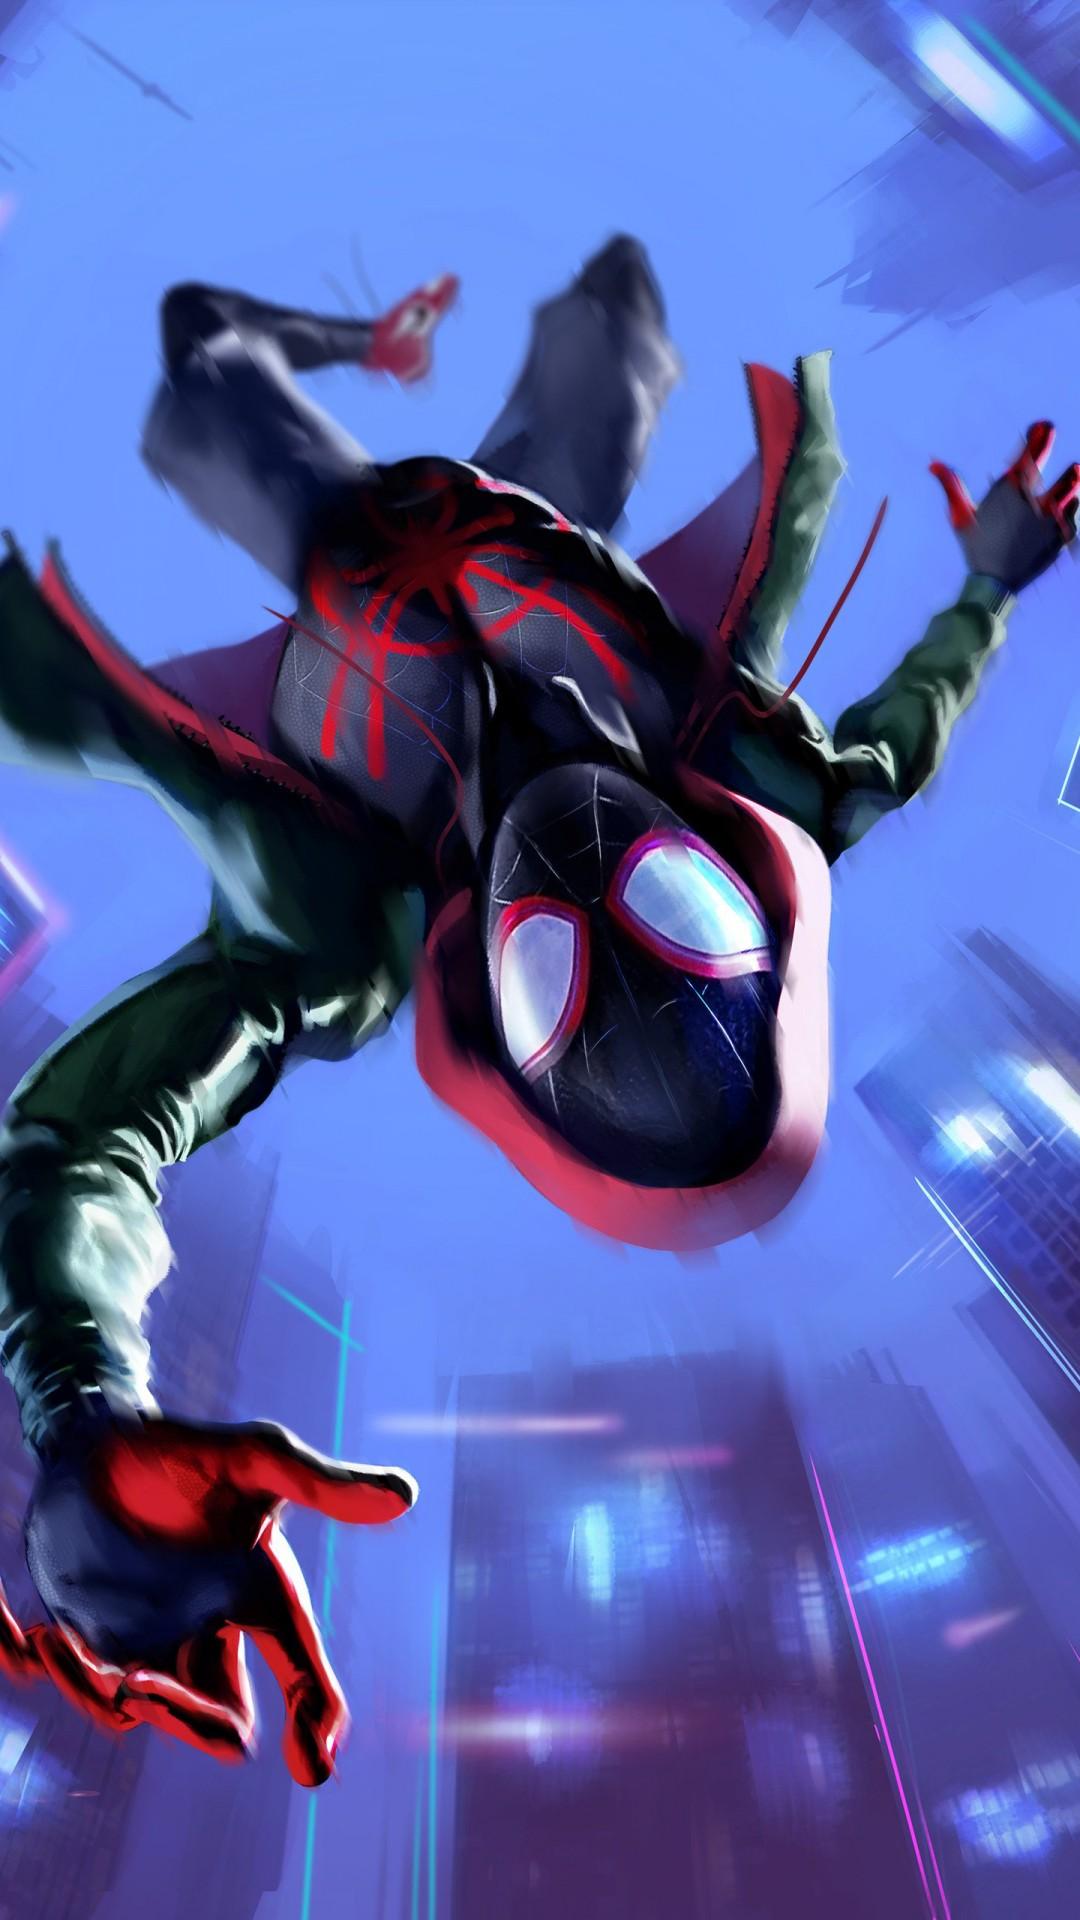 Miles Morales Android Wallpapers Wallpaper Cave Tons of awesome miles morales android wallpapers to download for free. miles morales android wallpapers